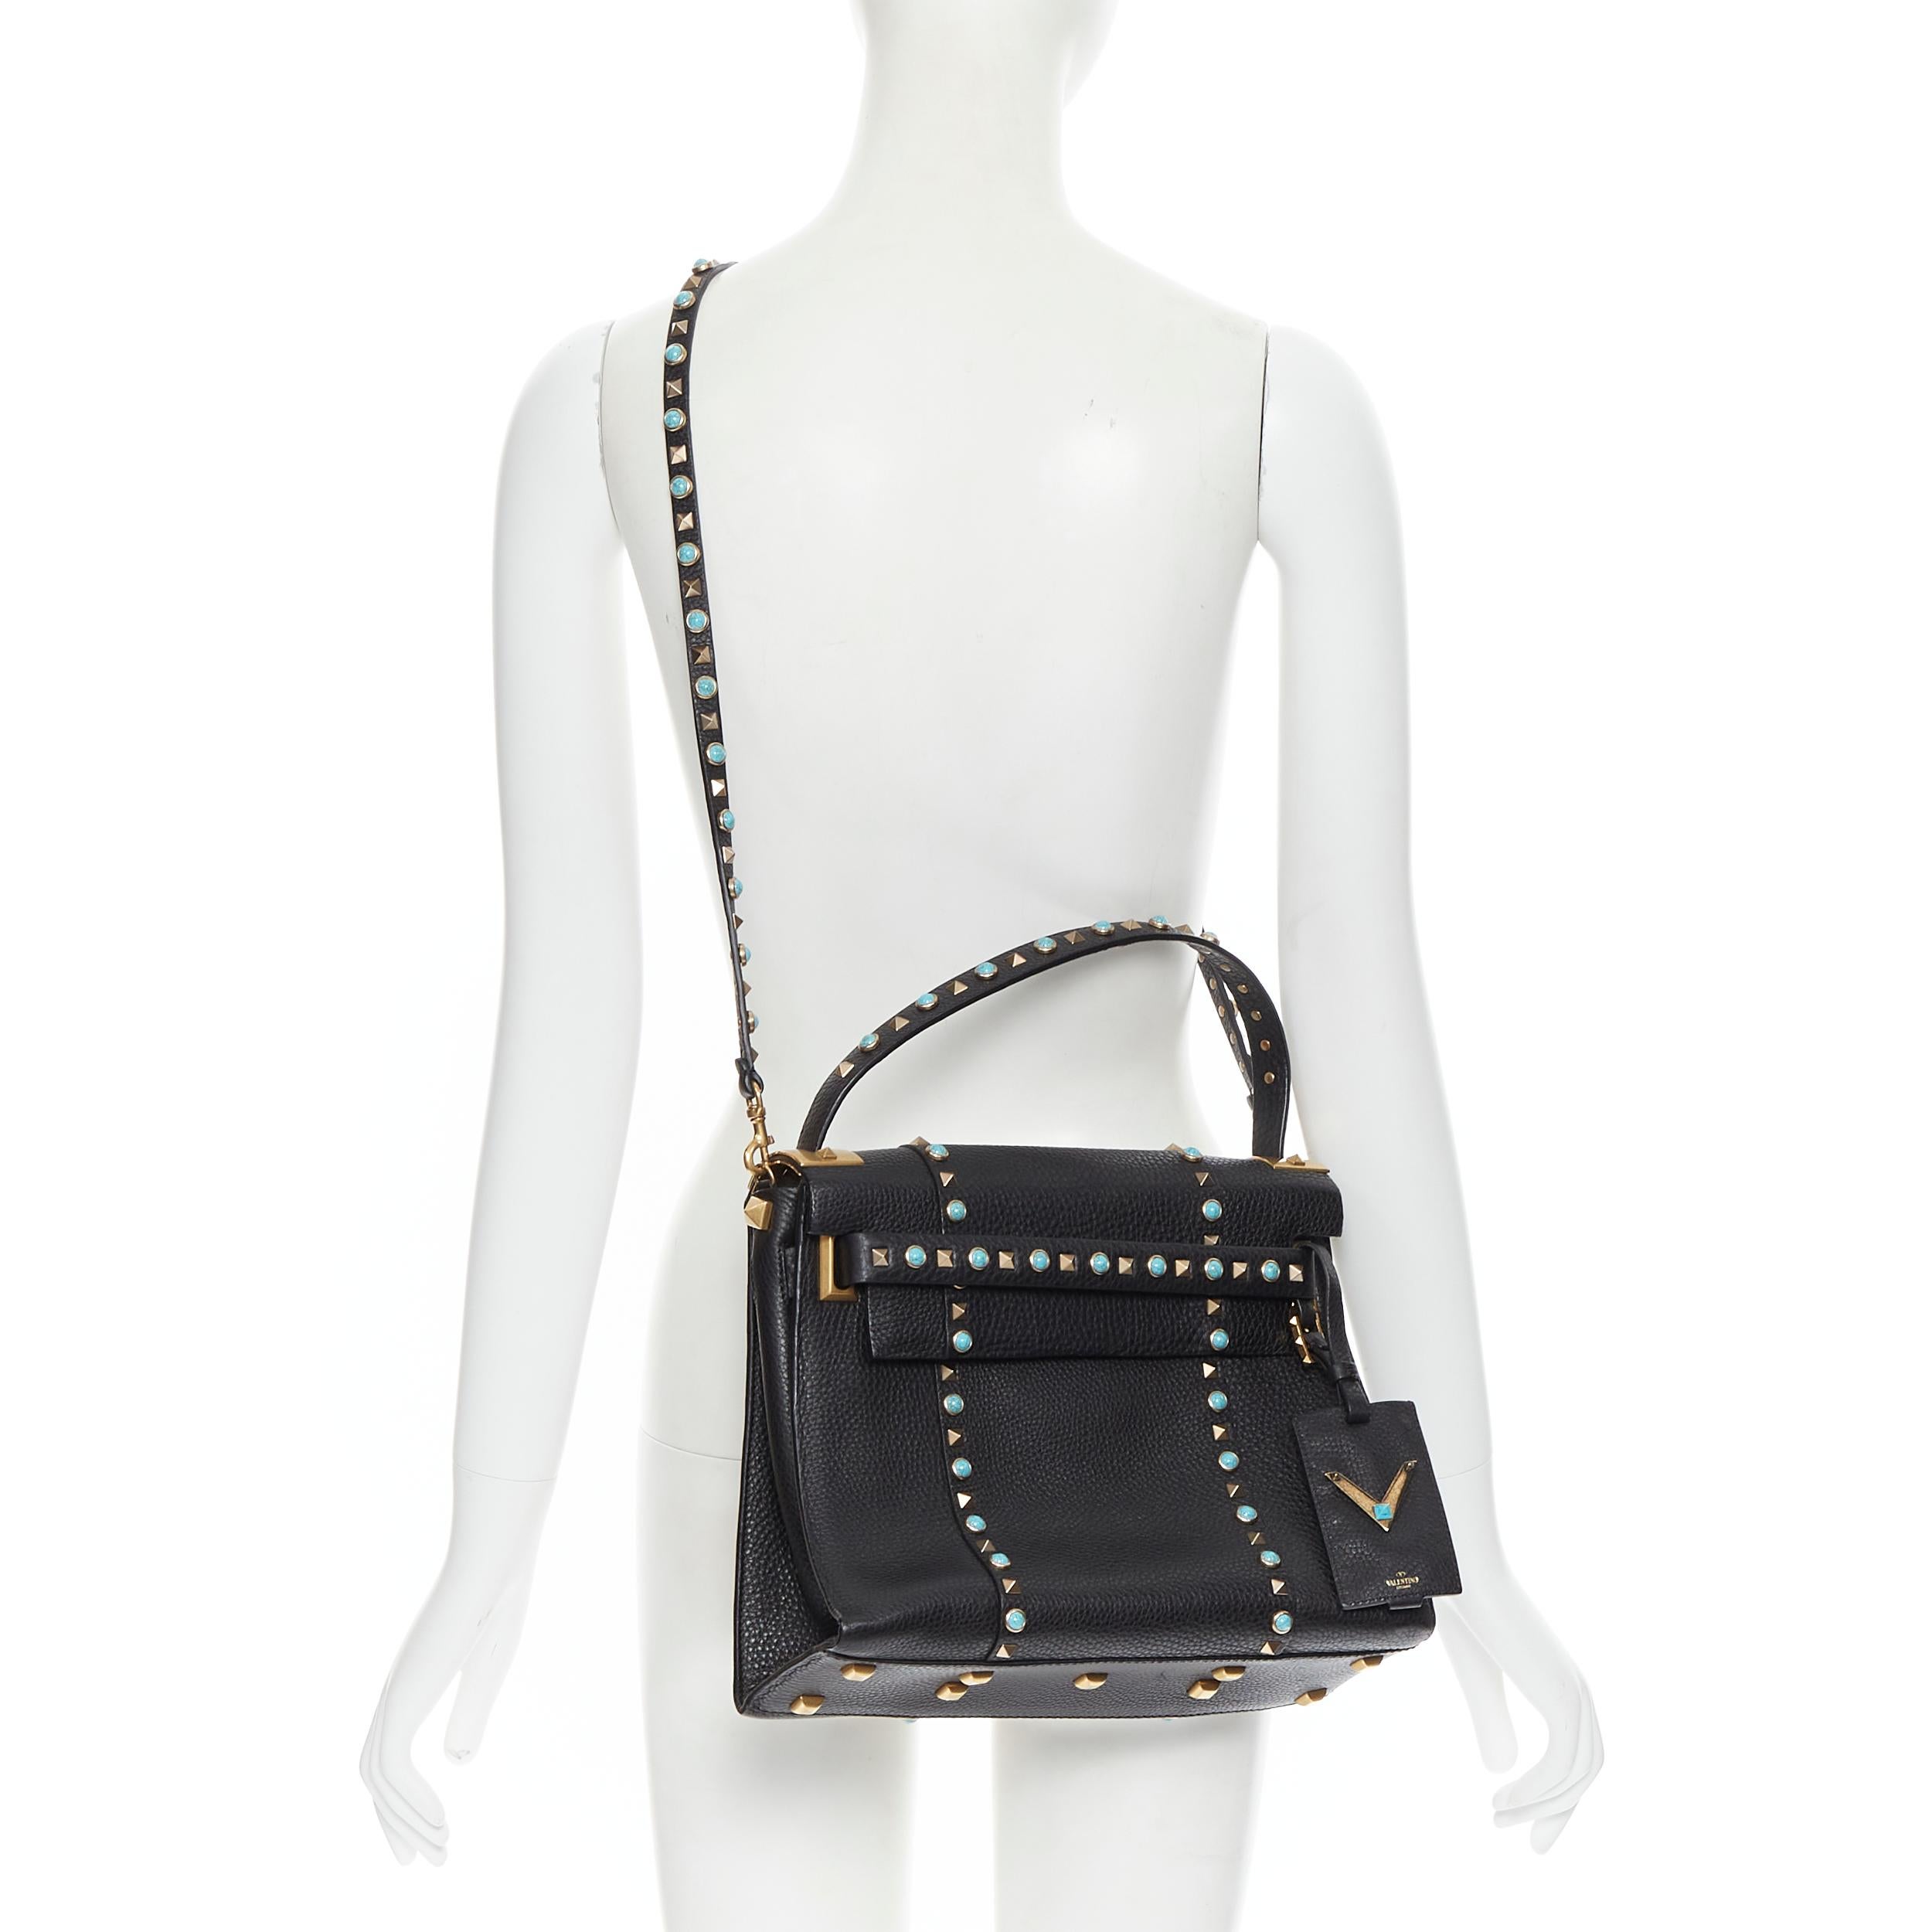 new VALENTINO black pebble leather turquoise stone Rockstud satchel shoulder bag 
Reference: MAWG/A00053 
Brand: Valentino 
Model: Rockstud satchel 
Material: Leather 
Color: Black 
Pattern: Solid 
Closure: Magnetic 
Extra Detail: Turquoise stone